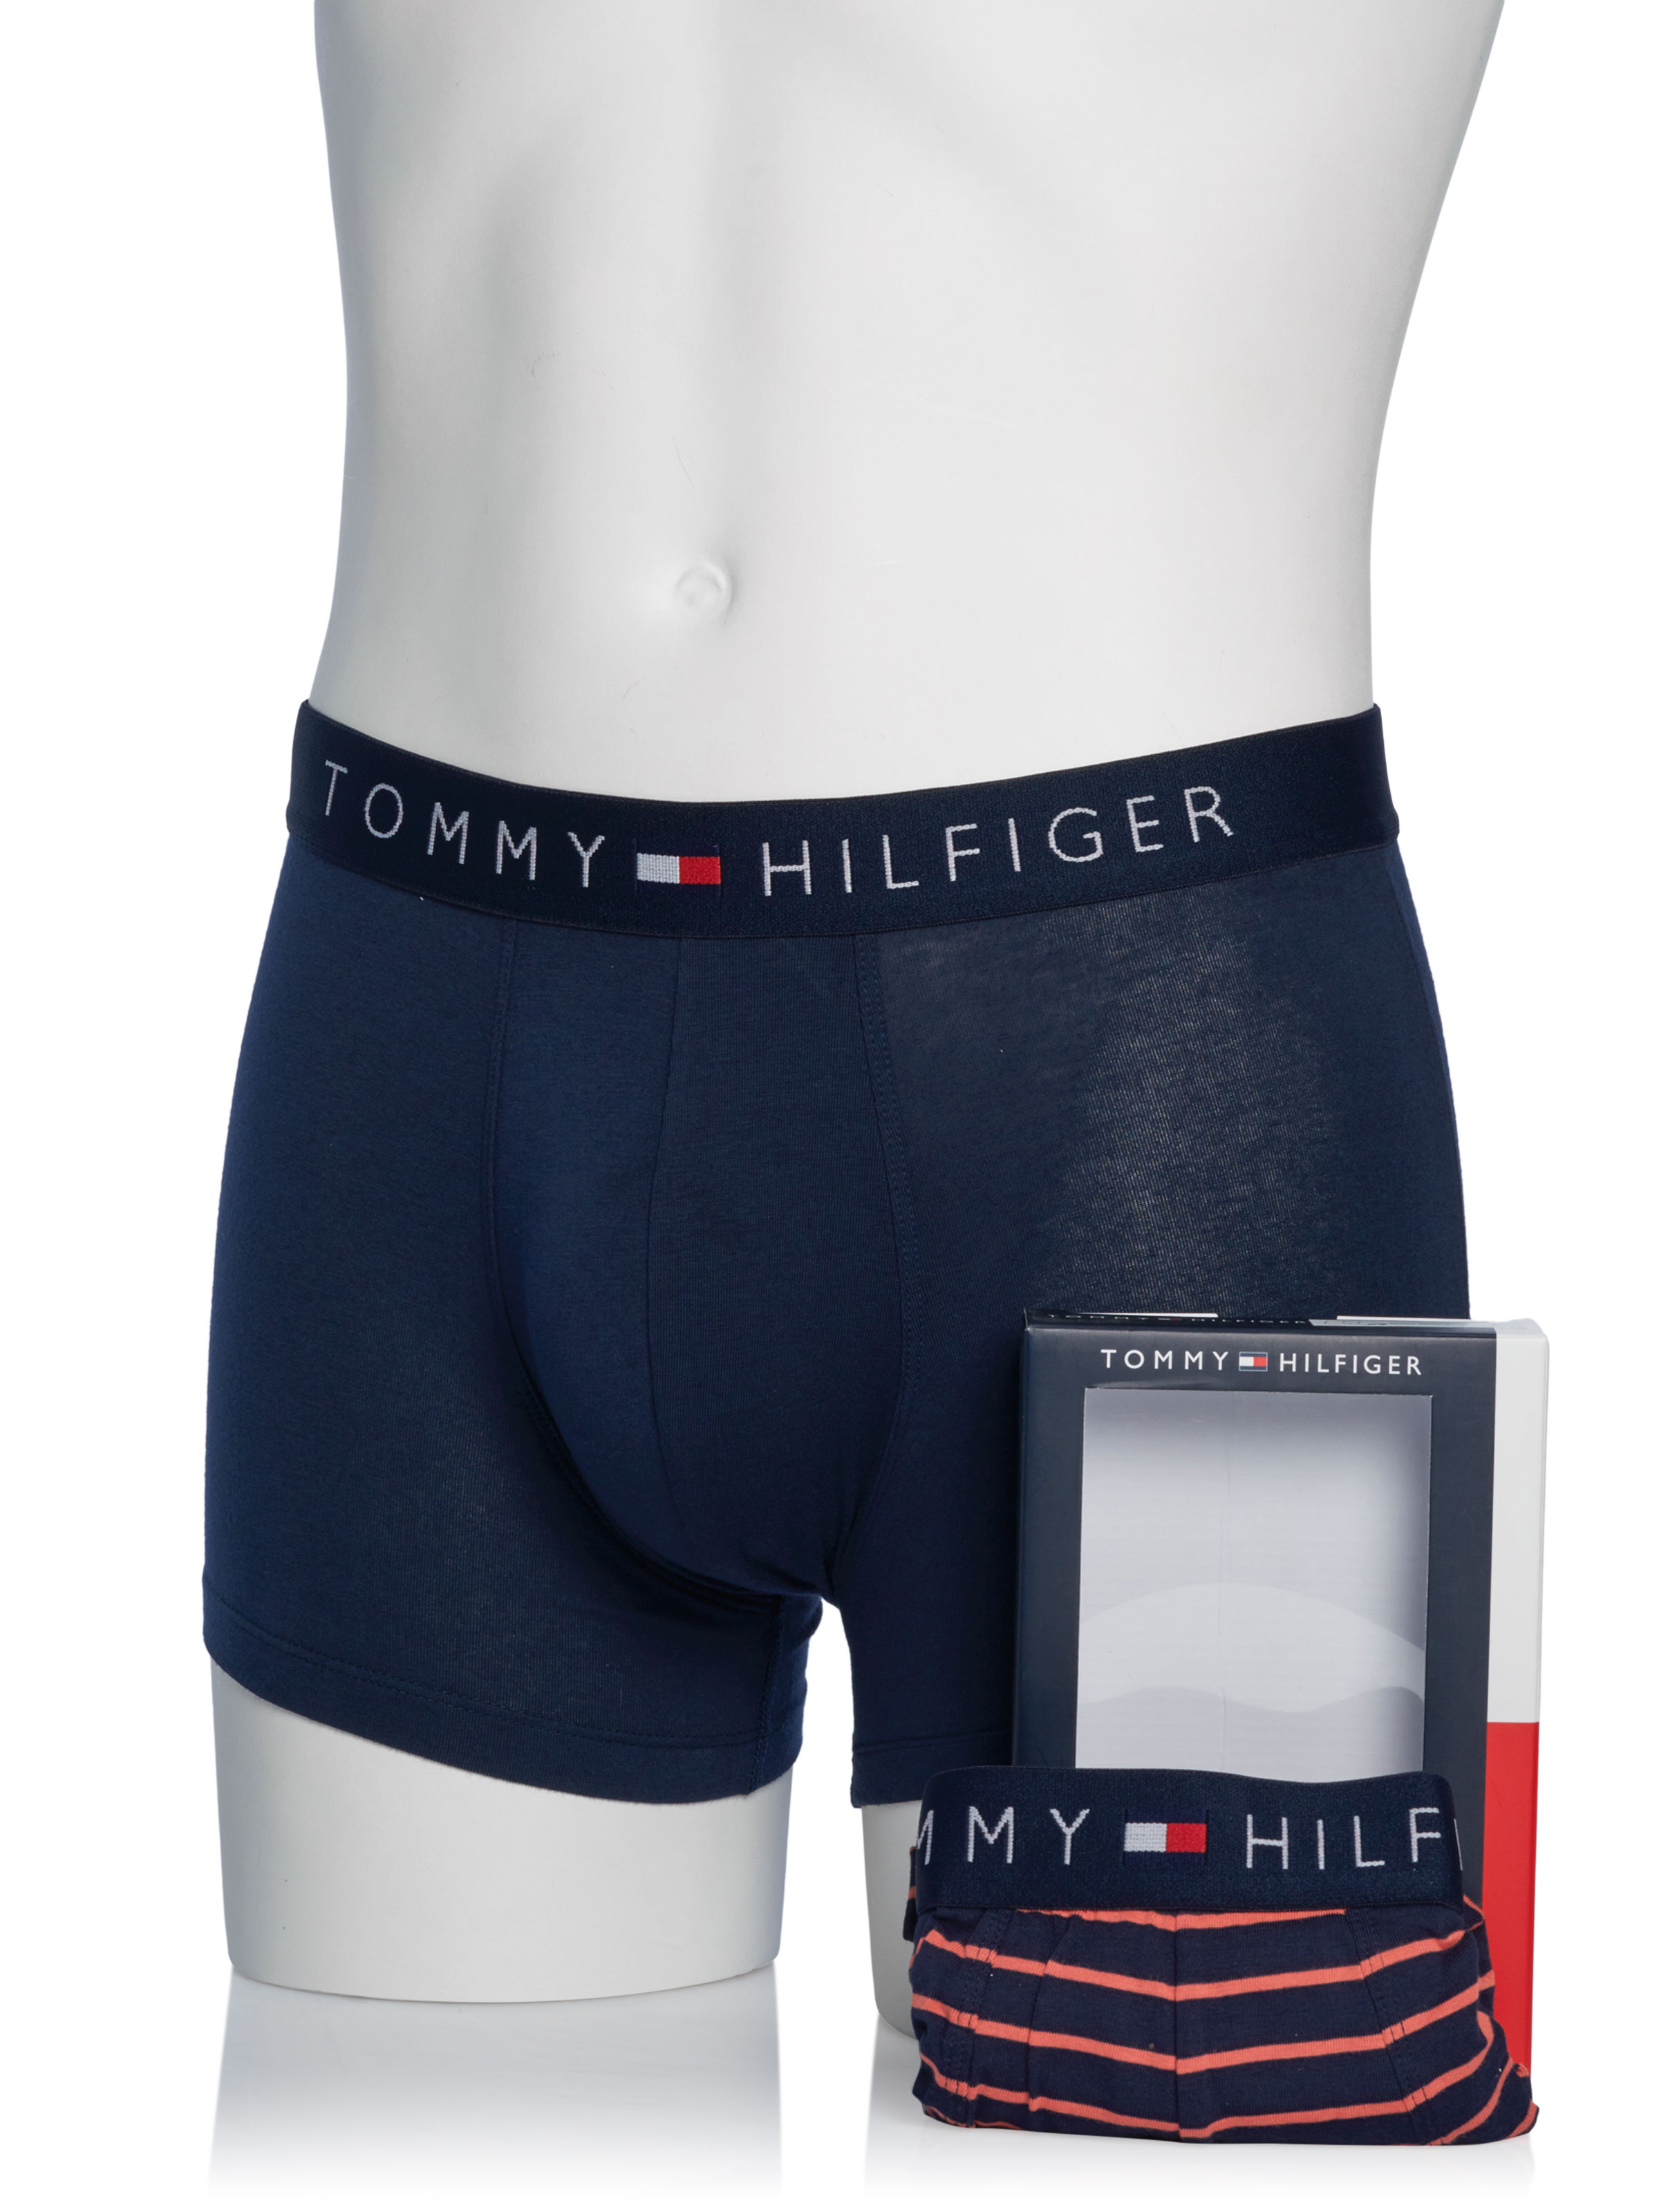 Tommy Hilfiger double pack on SALE | Fashionesta